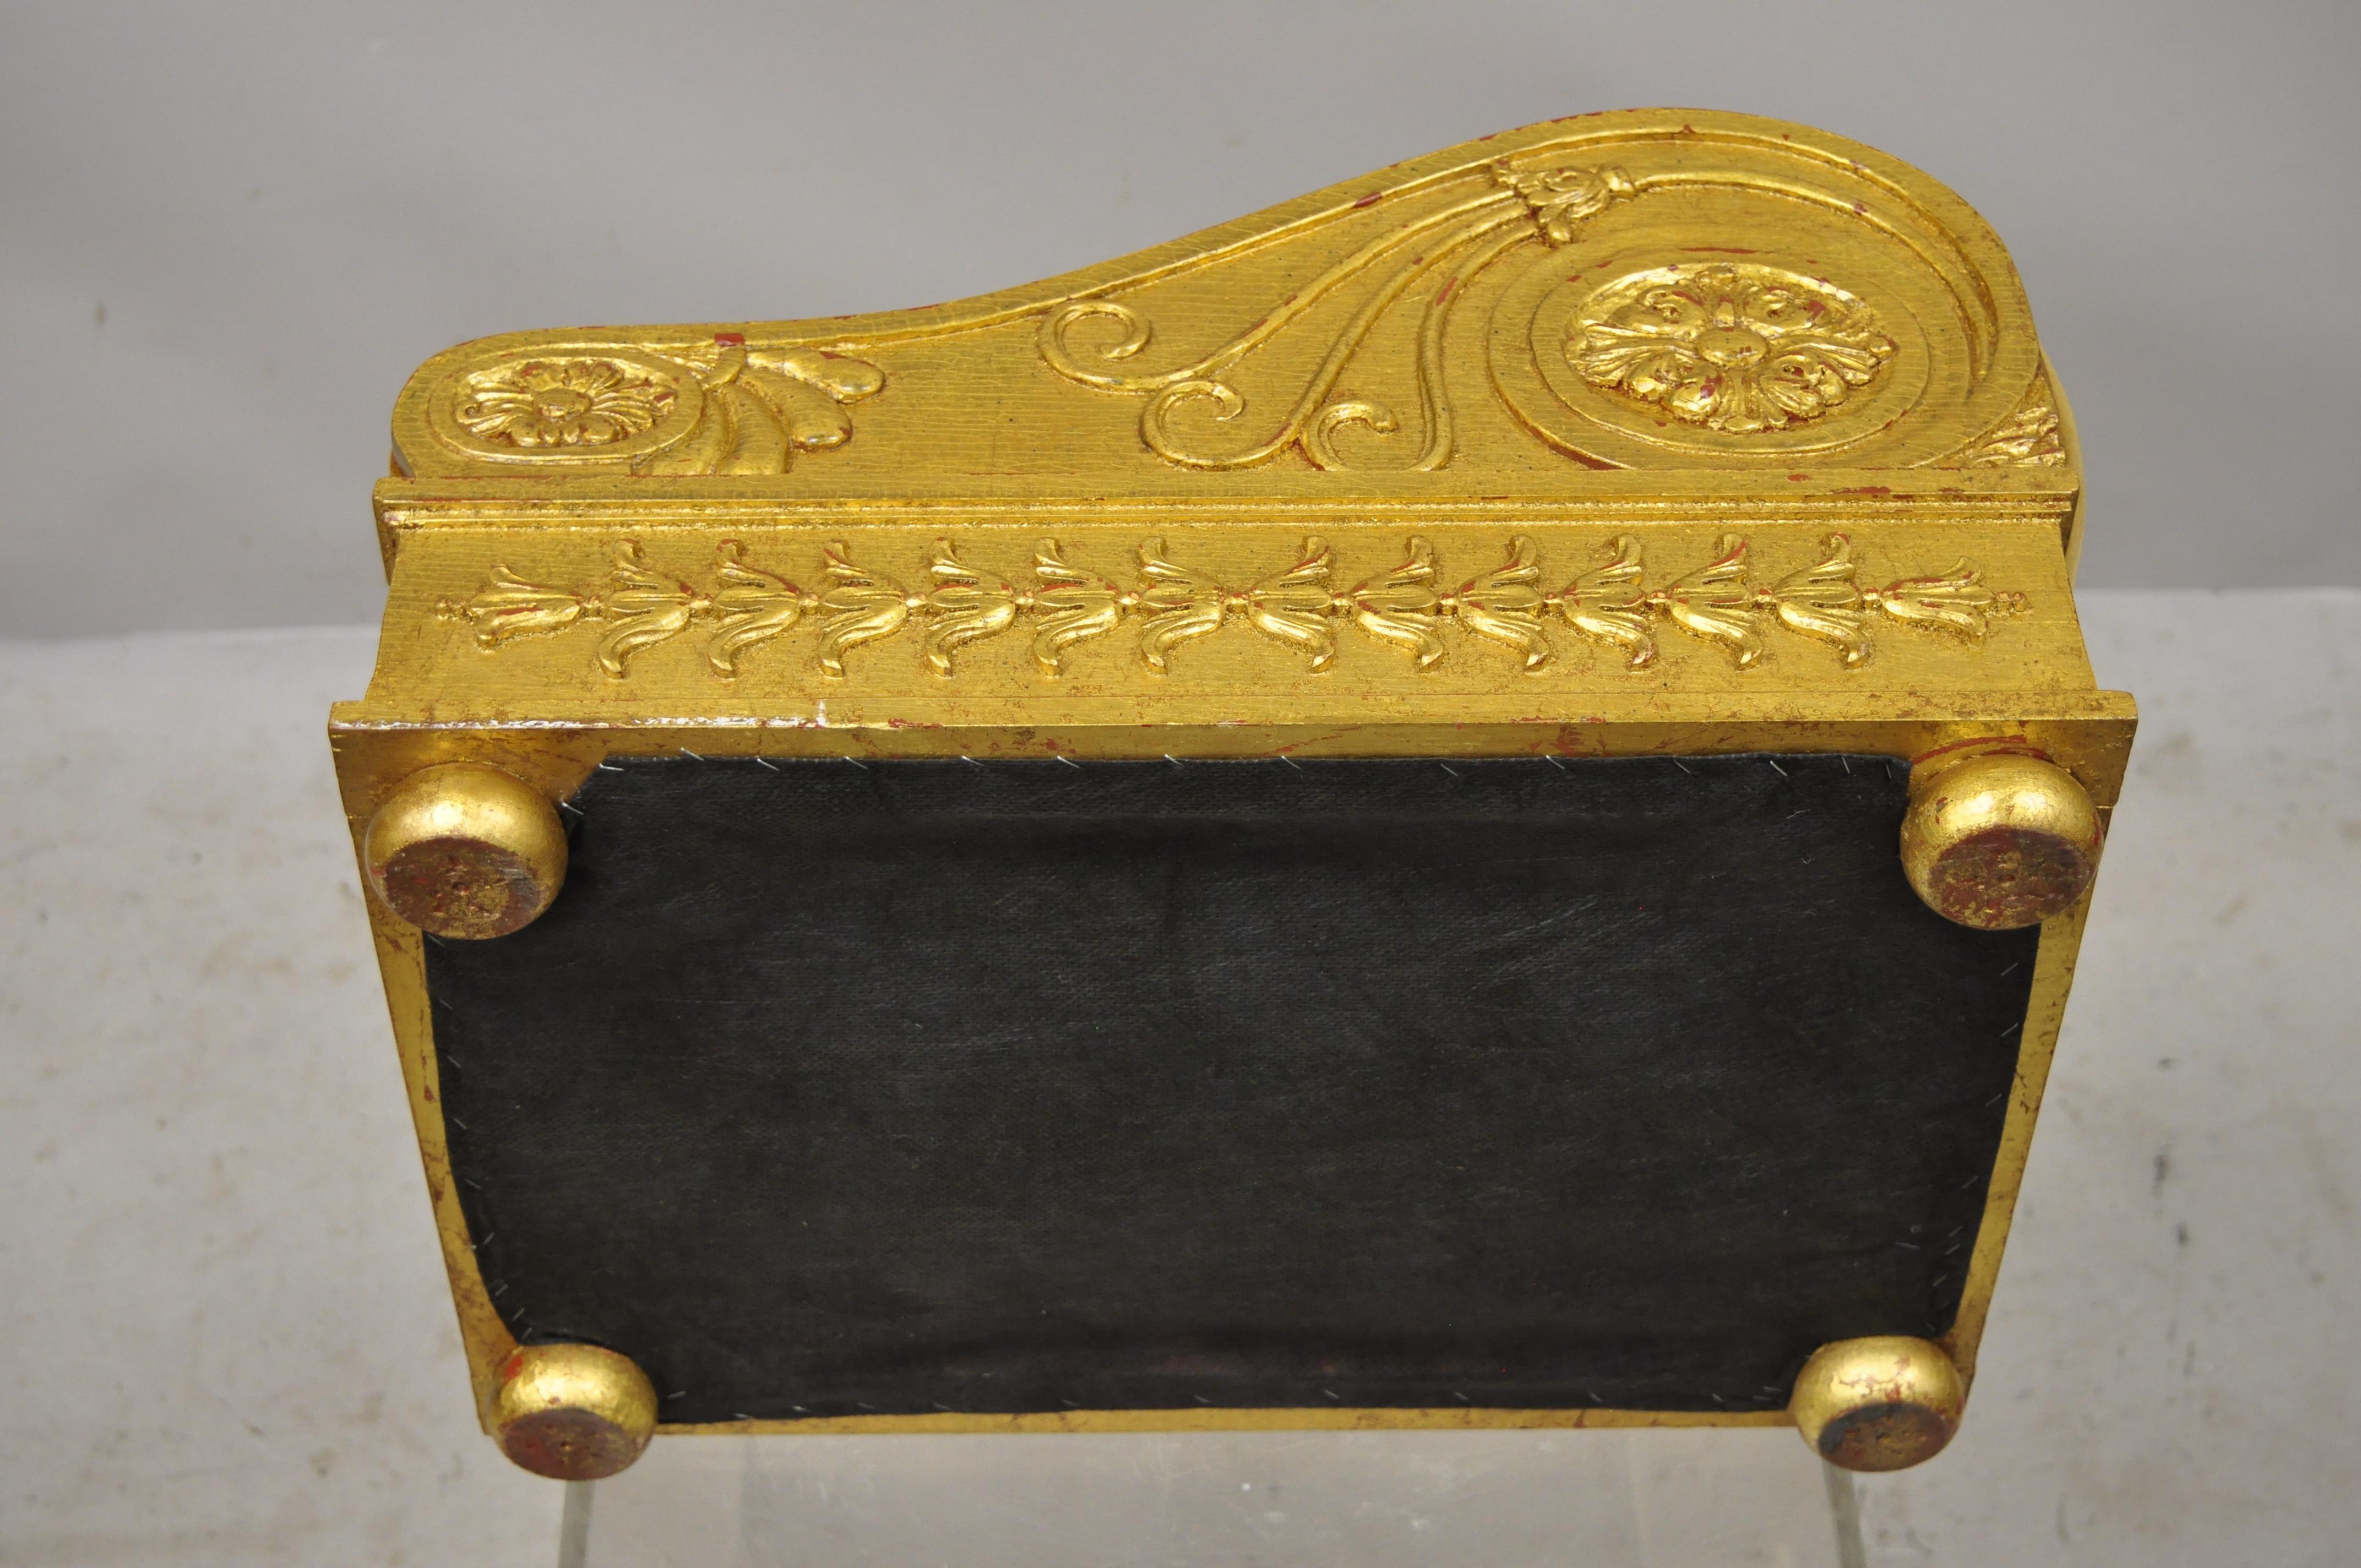 Vintage Italian Empire Style Gold Giltwood Swedish Gout Stool Footstool Ottoman For Sale 3